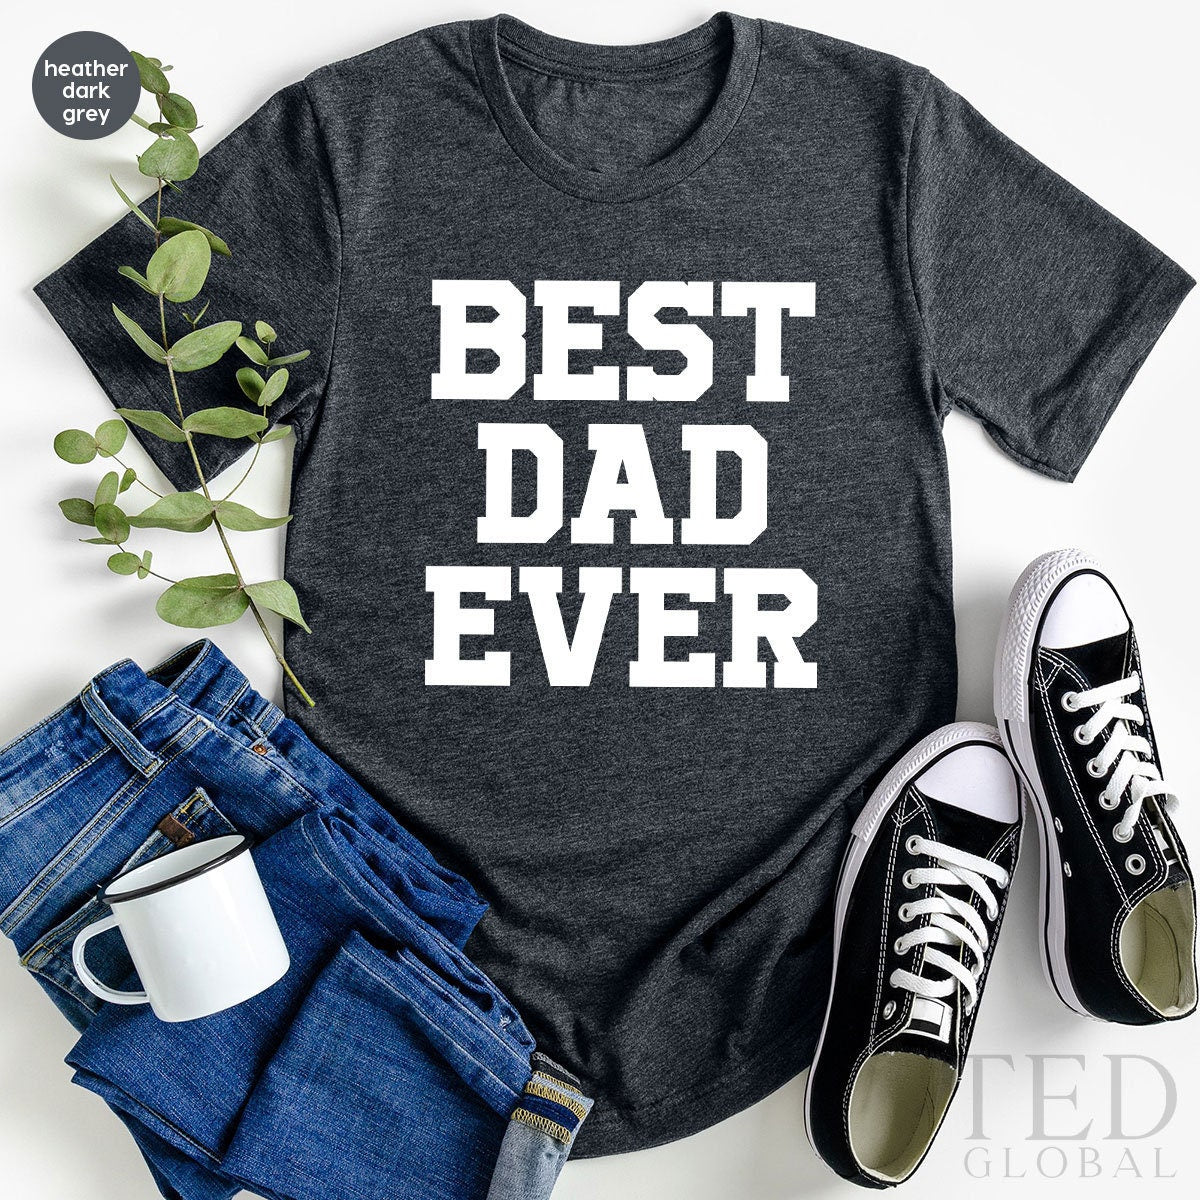 Best Dad Ever Shirt, Fathers Day Shirt, Gifts For Dad, Fathers Day Tee, Dad Birthday Gift, Dad To Be Shirt, New Dad Gift, Best Dad Shirt - Fastdeliverytees.com